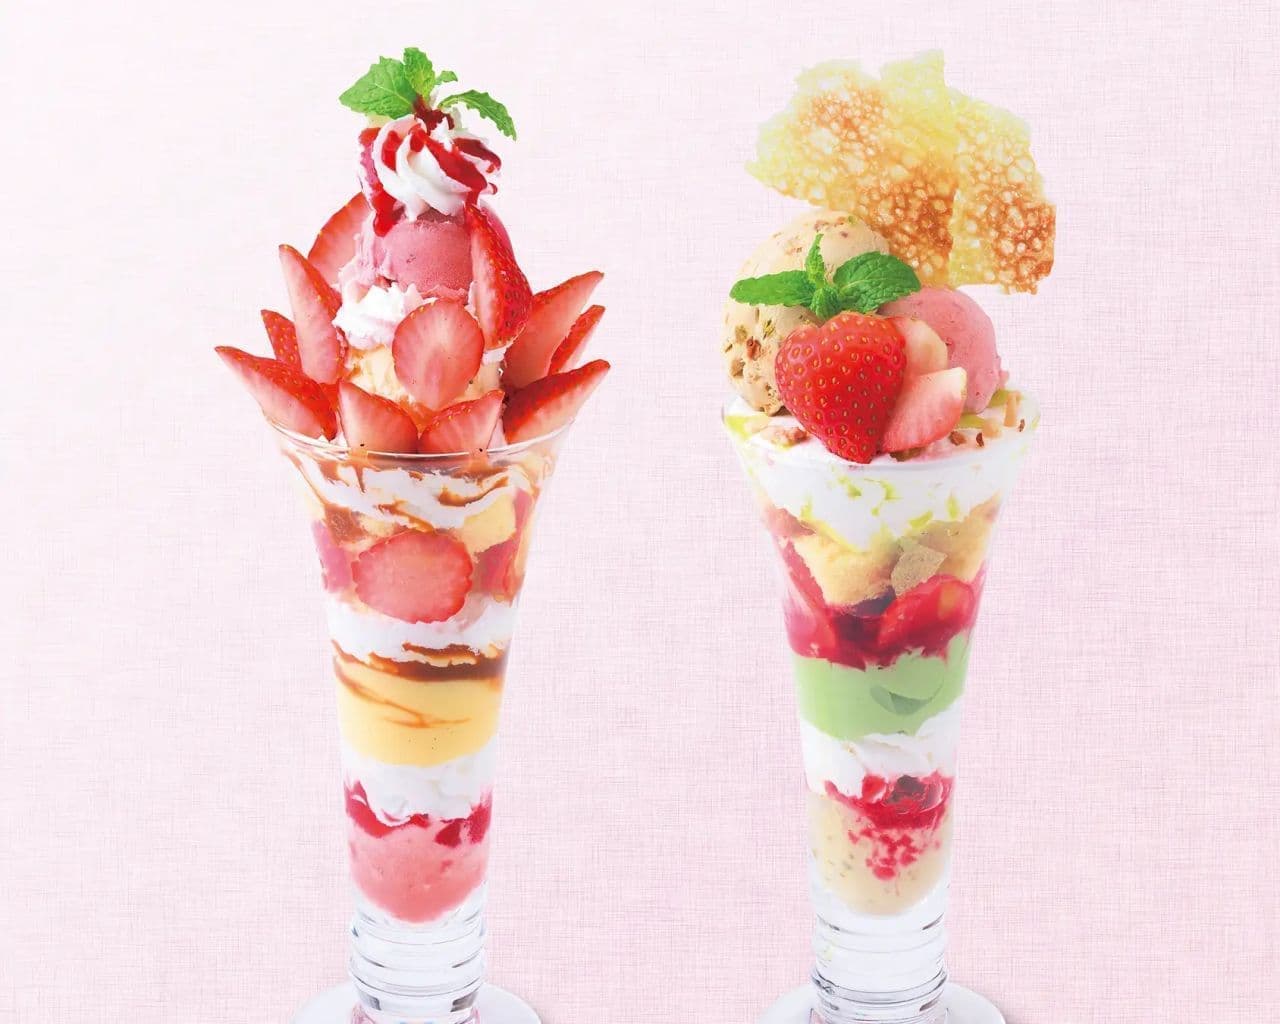 Ginza Kozy Corner "Strawberry Spring Parfait with Custard & Caramel Sauce" and "Spring Colorful Trifle with Rich Pistachio & Refreshing Berry